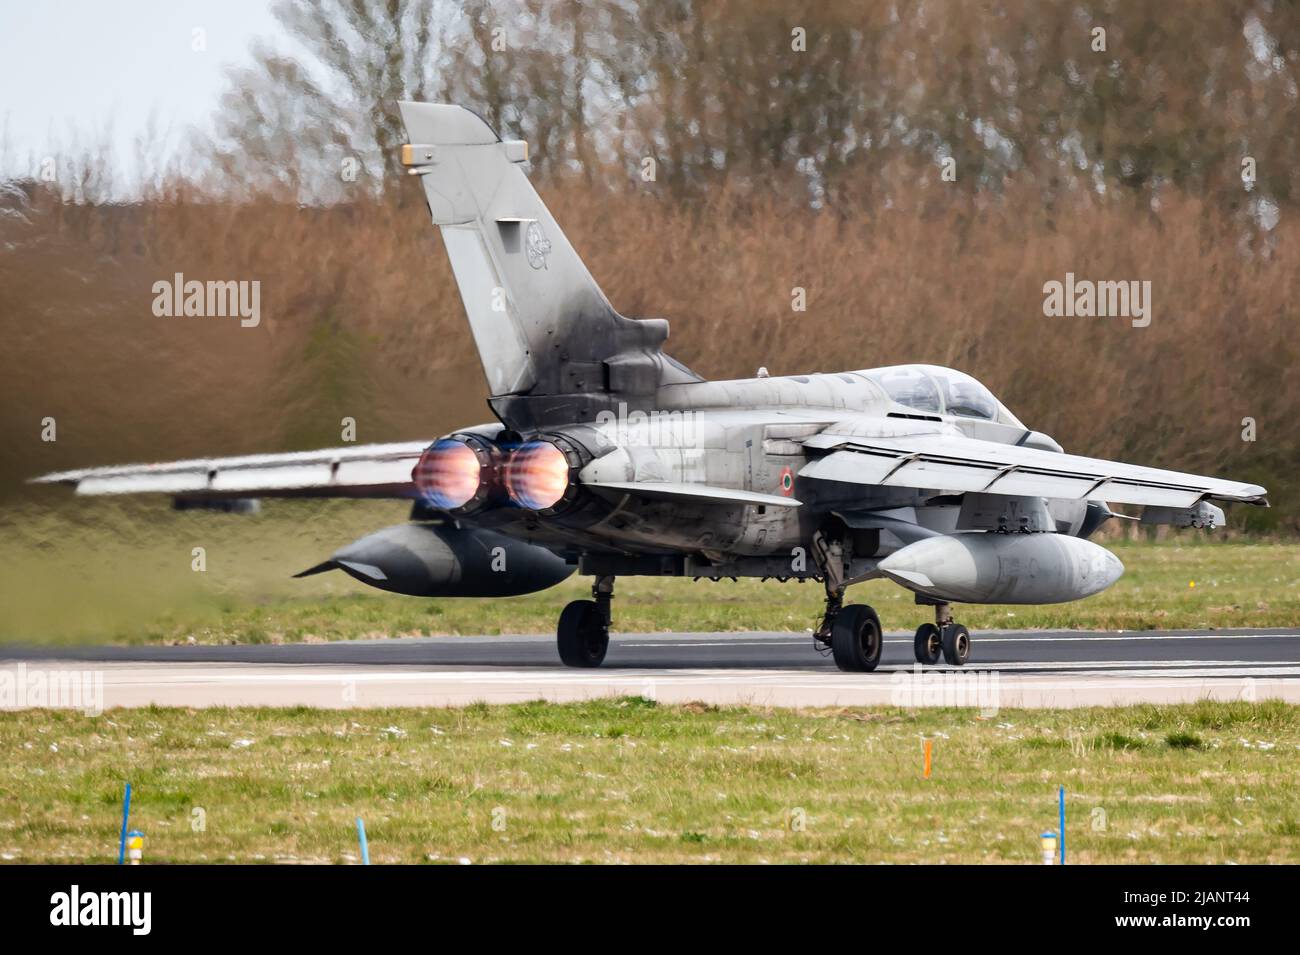 A Panavia Tornado IDS combat aircraft from the 6th Wing of the Italian Air Force. Stock Photo